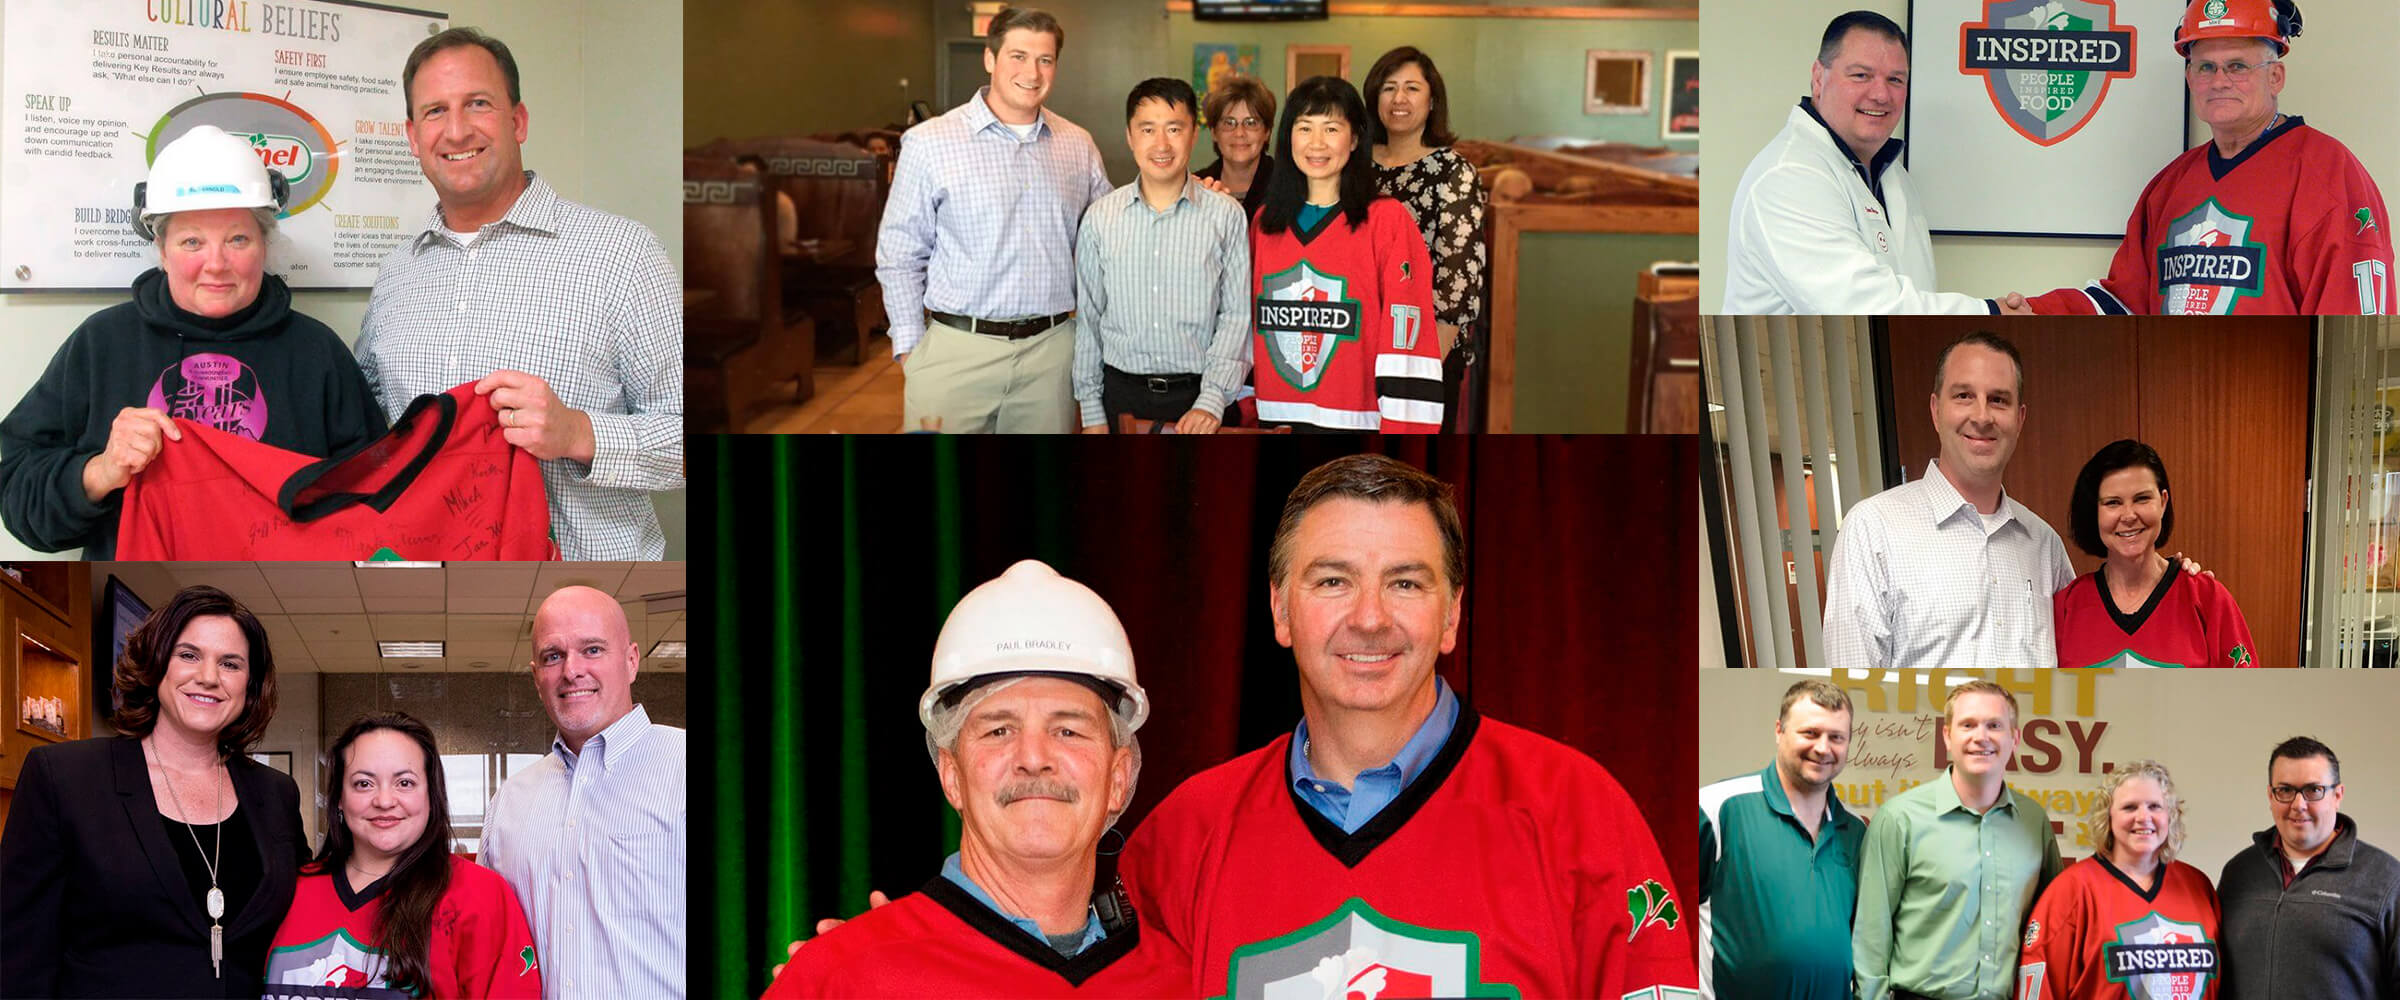 Employees wearing jersey and posing with executives